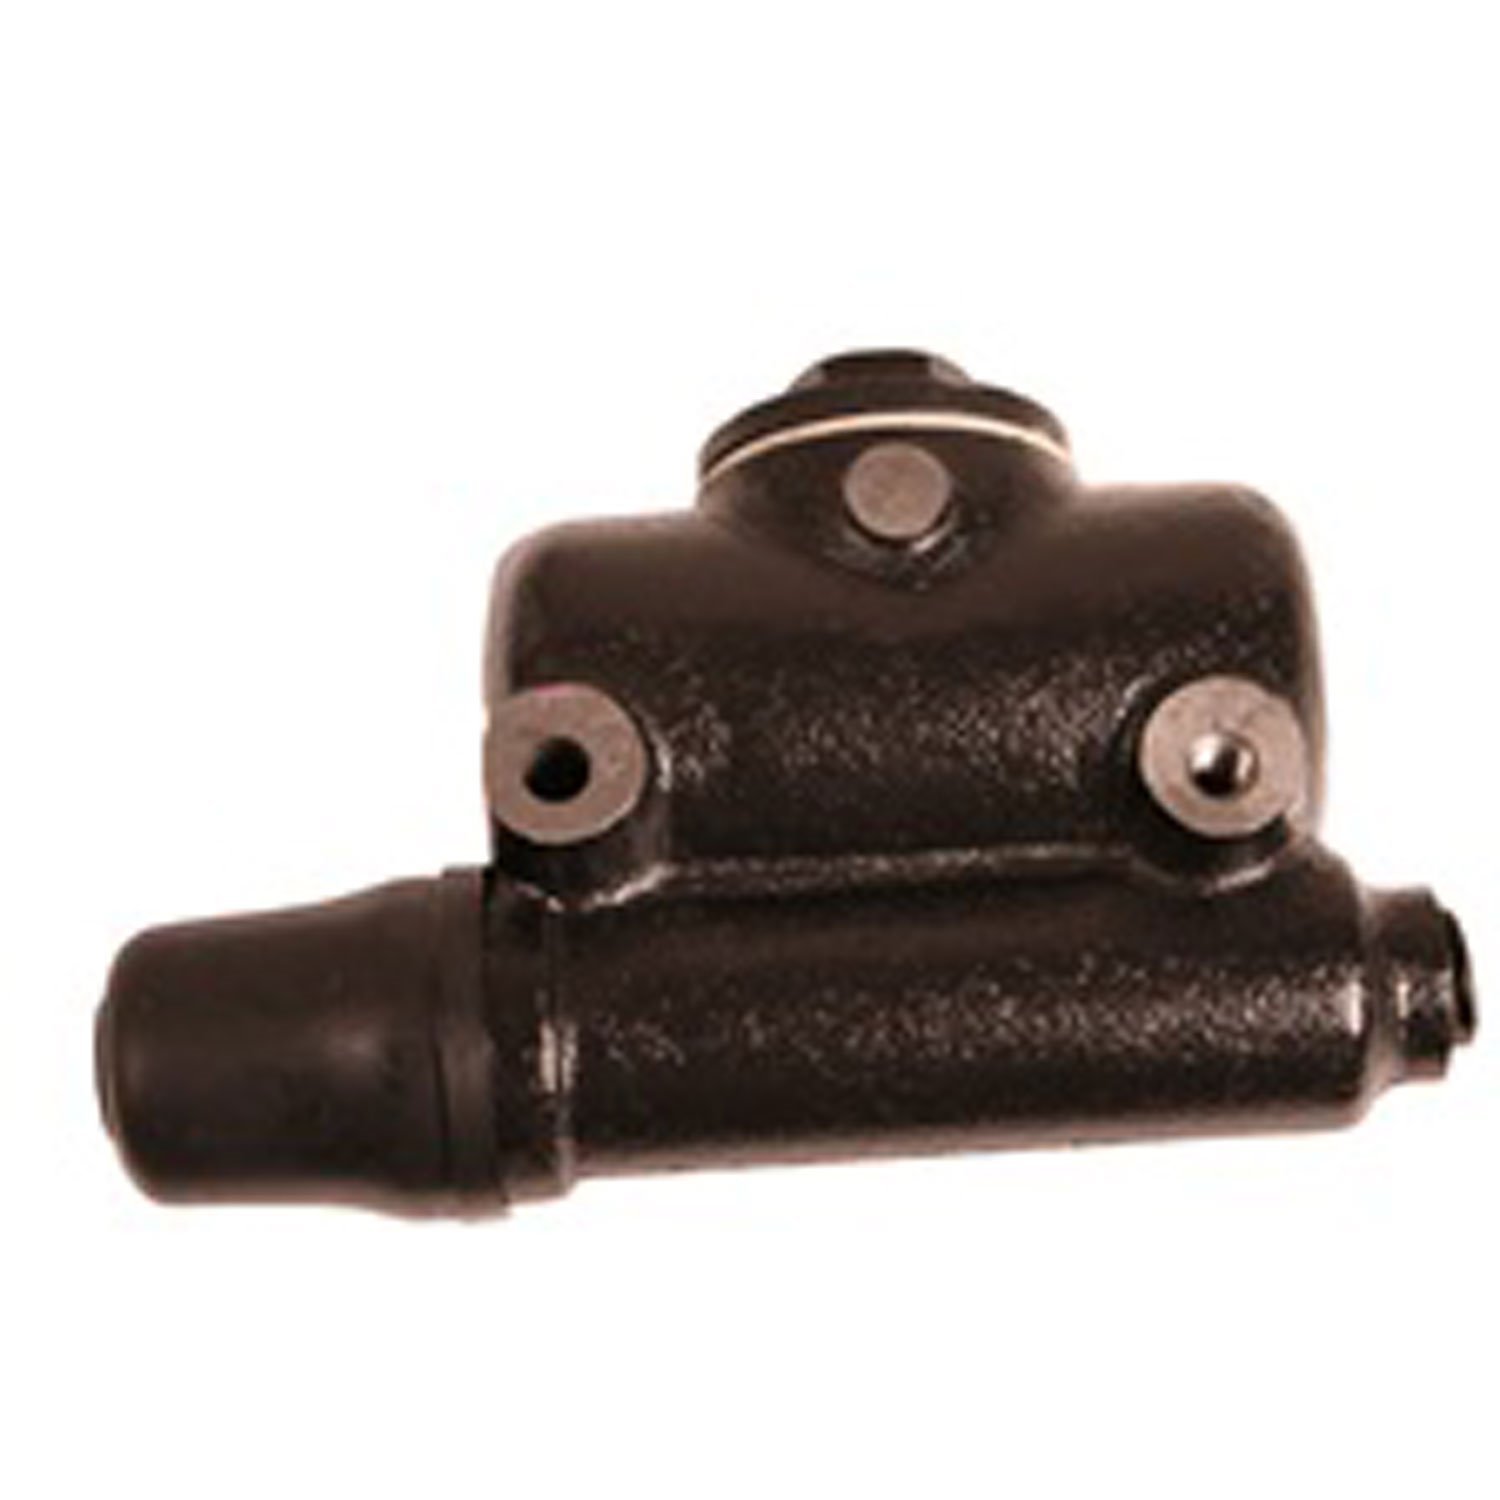 This factory -style replacement brake master cylinder from Omix-ADA fits 41-45 Ford GPWs/Willys MB a